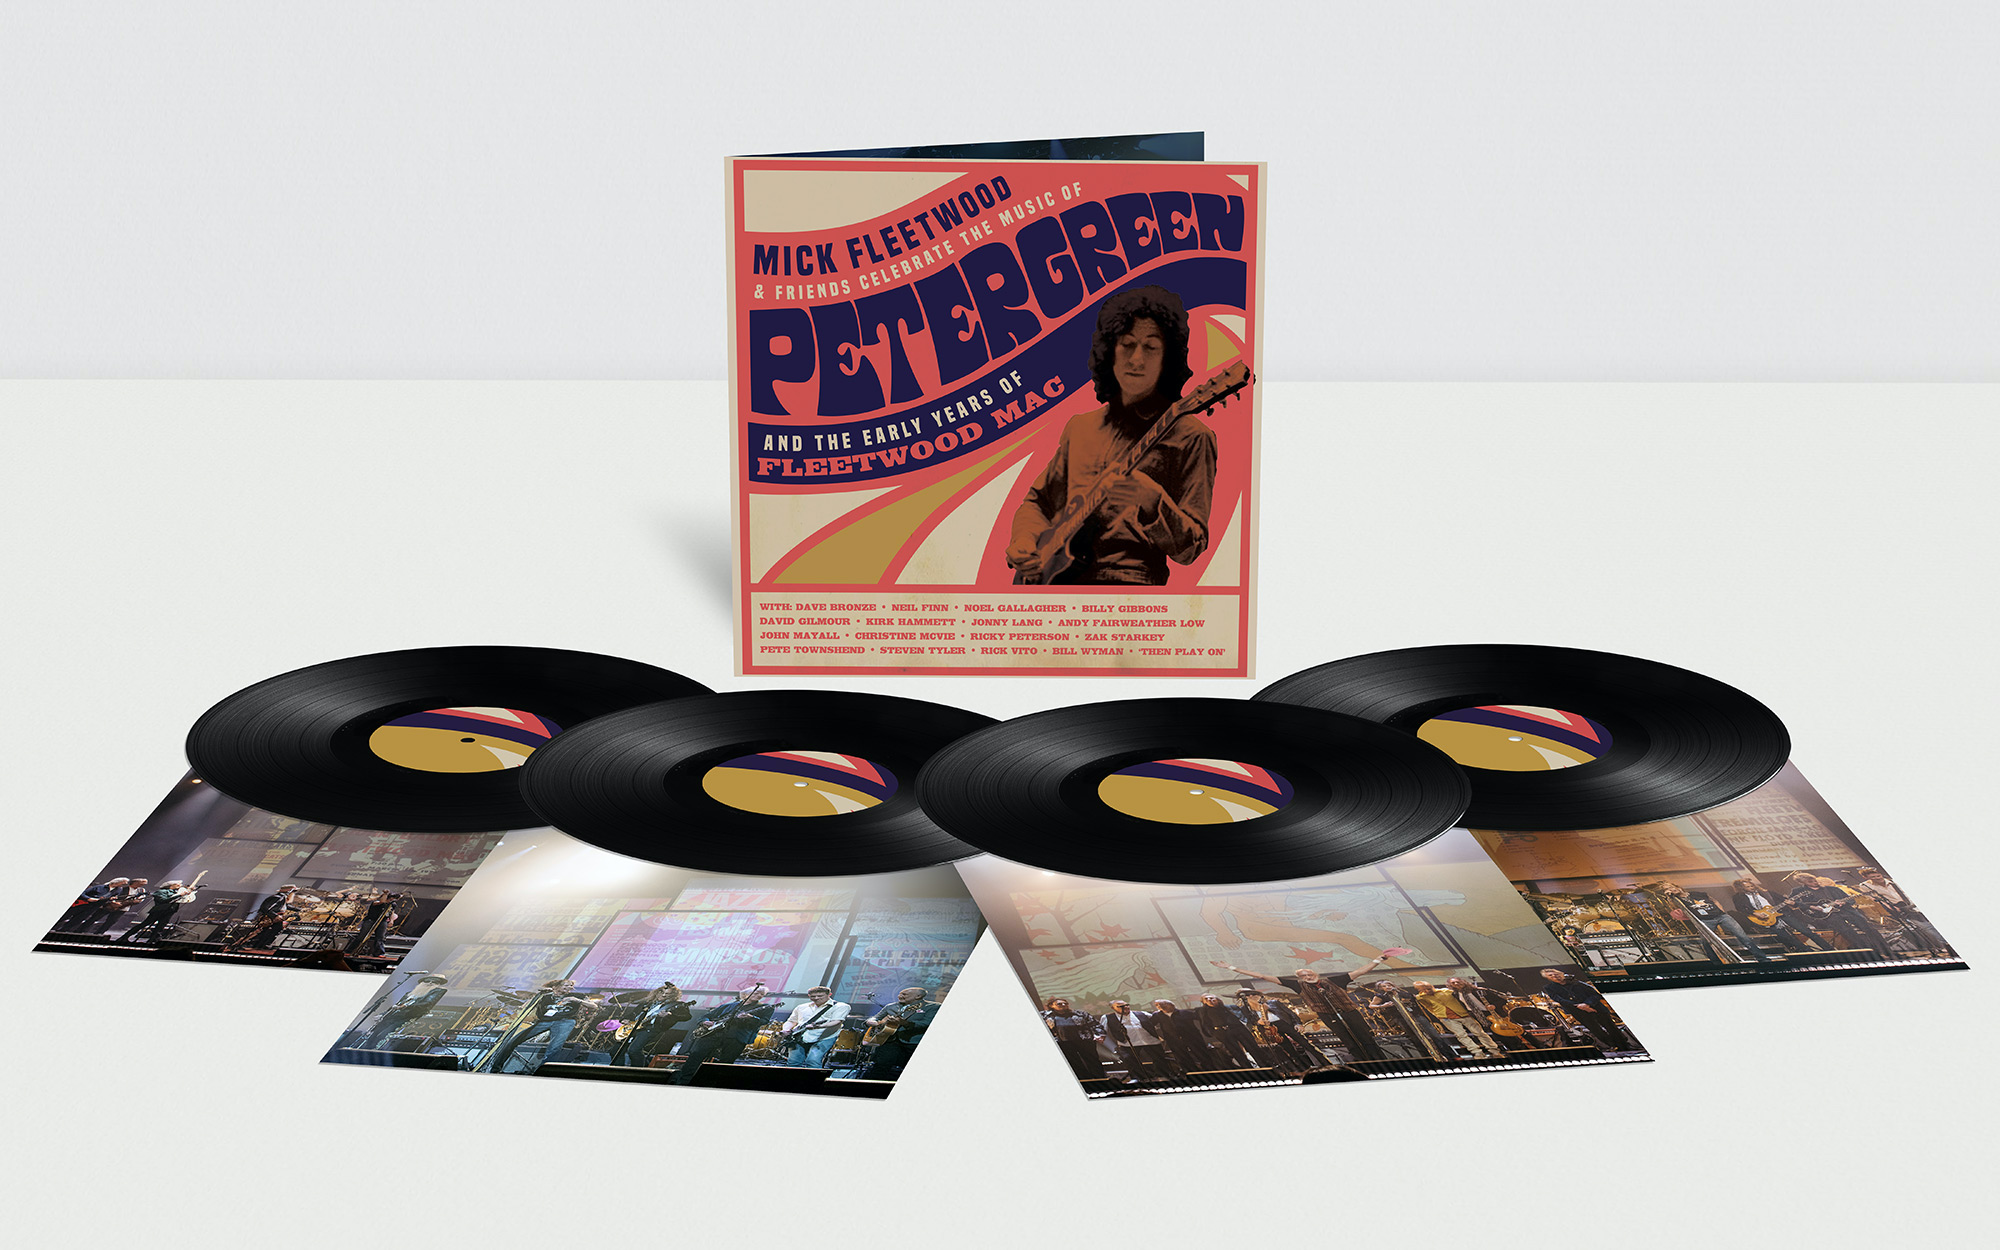 Celebrate The Music Of Peter Green And The Early Years Of Fleetwood Mac (Vinyl)